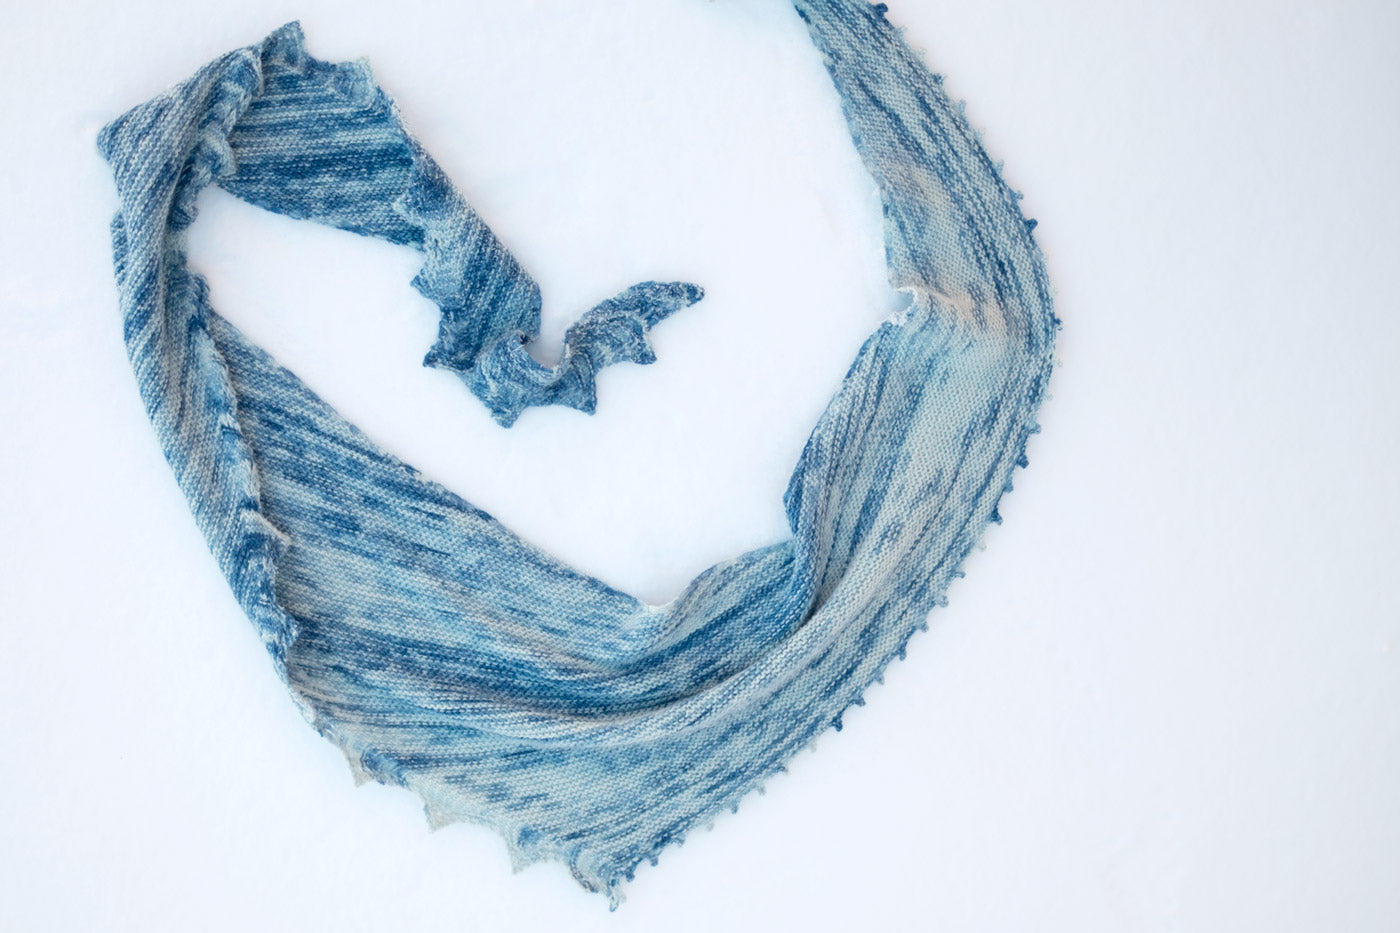 Swan Shawl in the snow